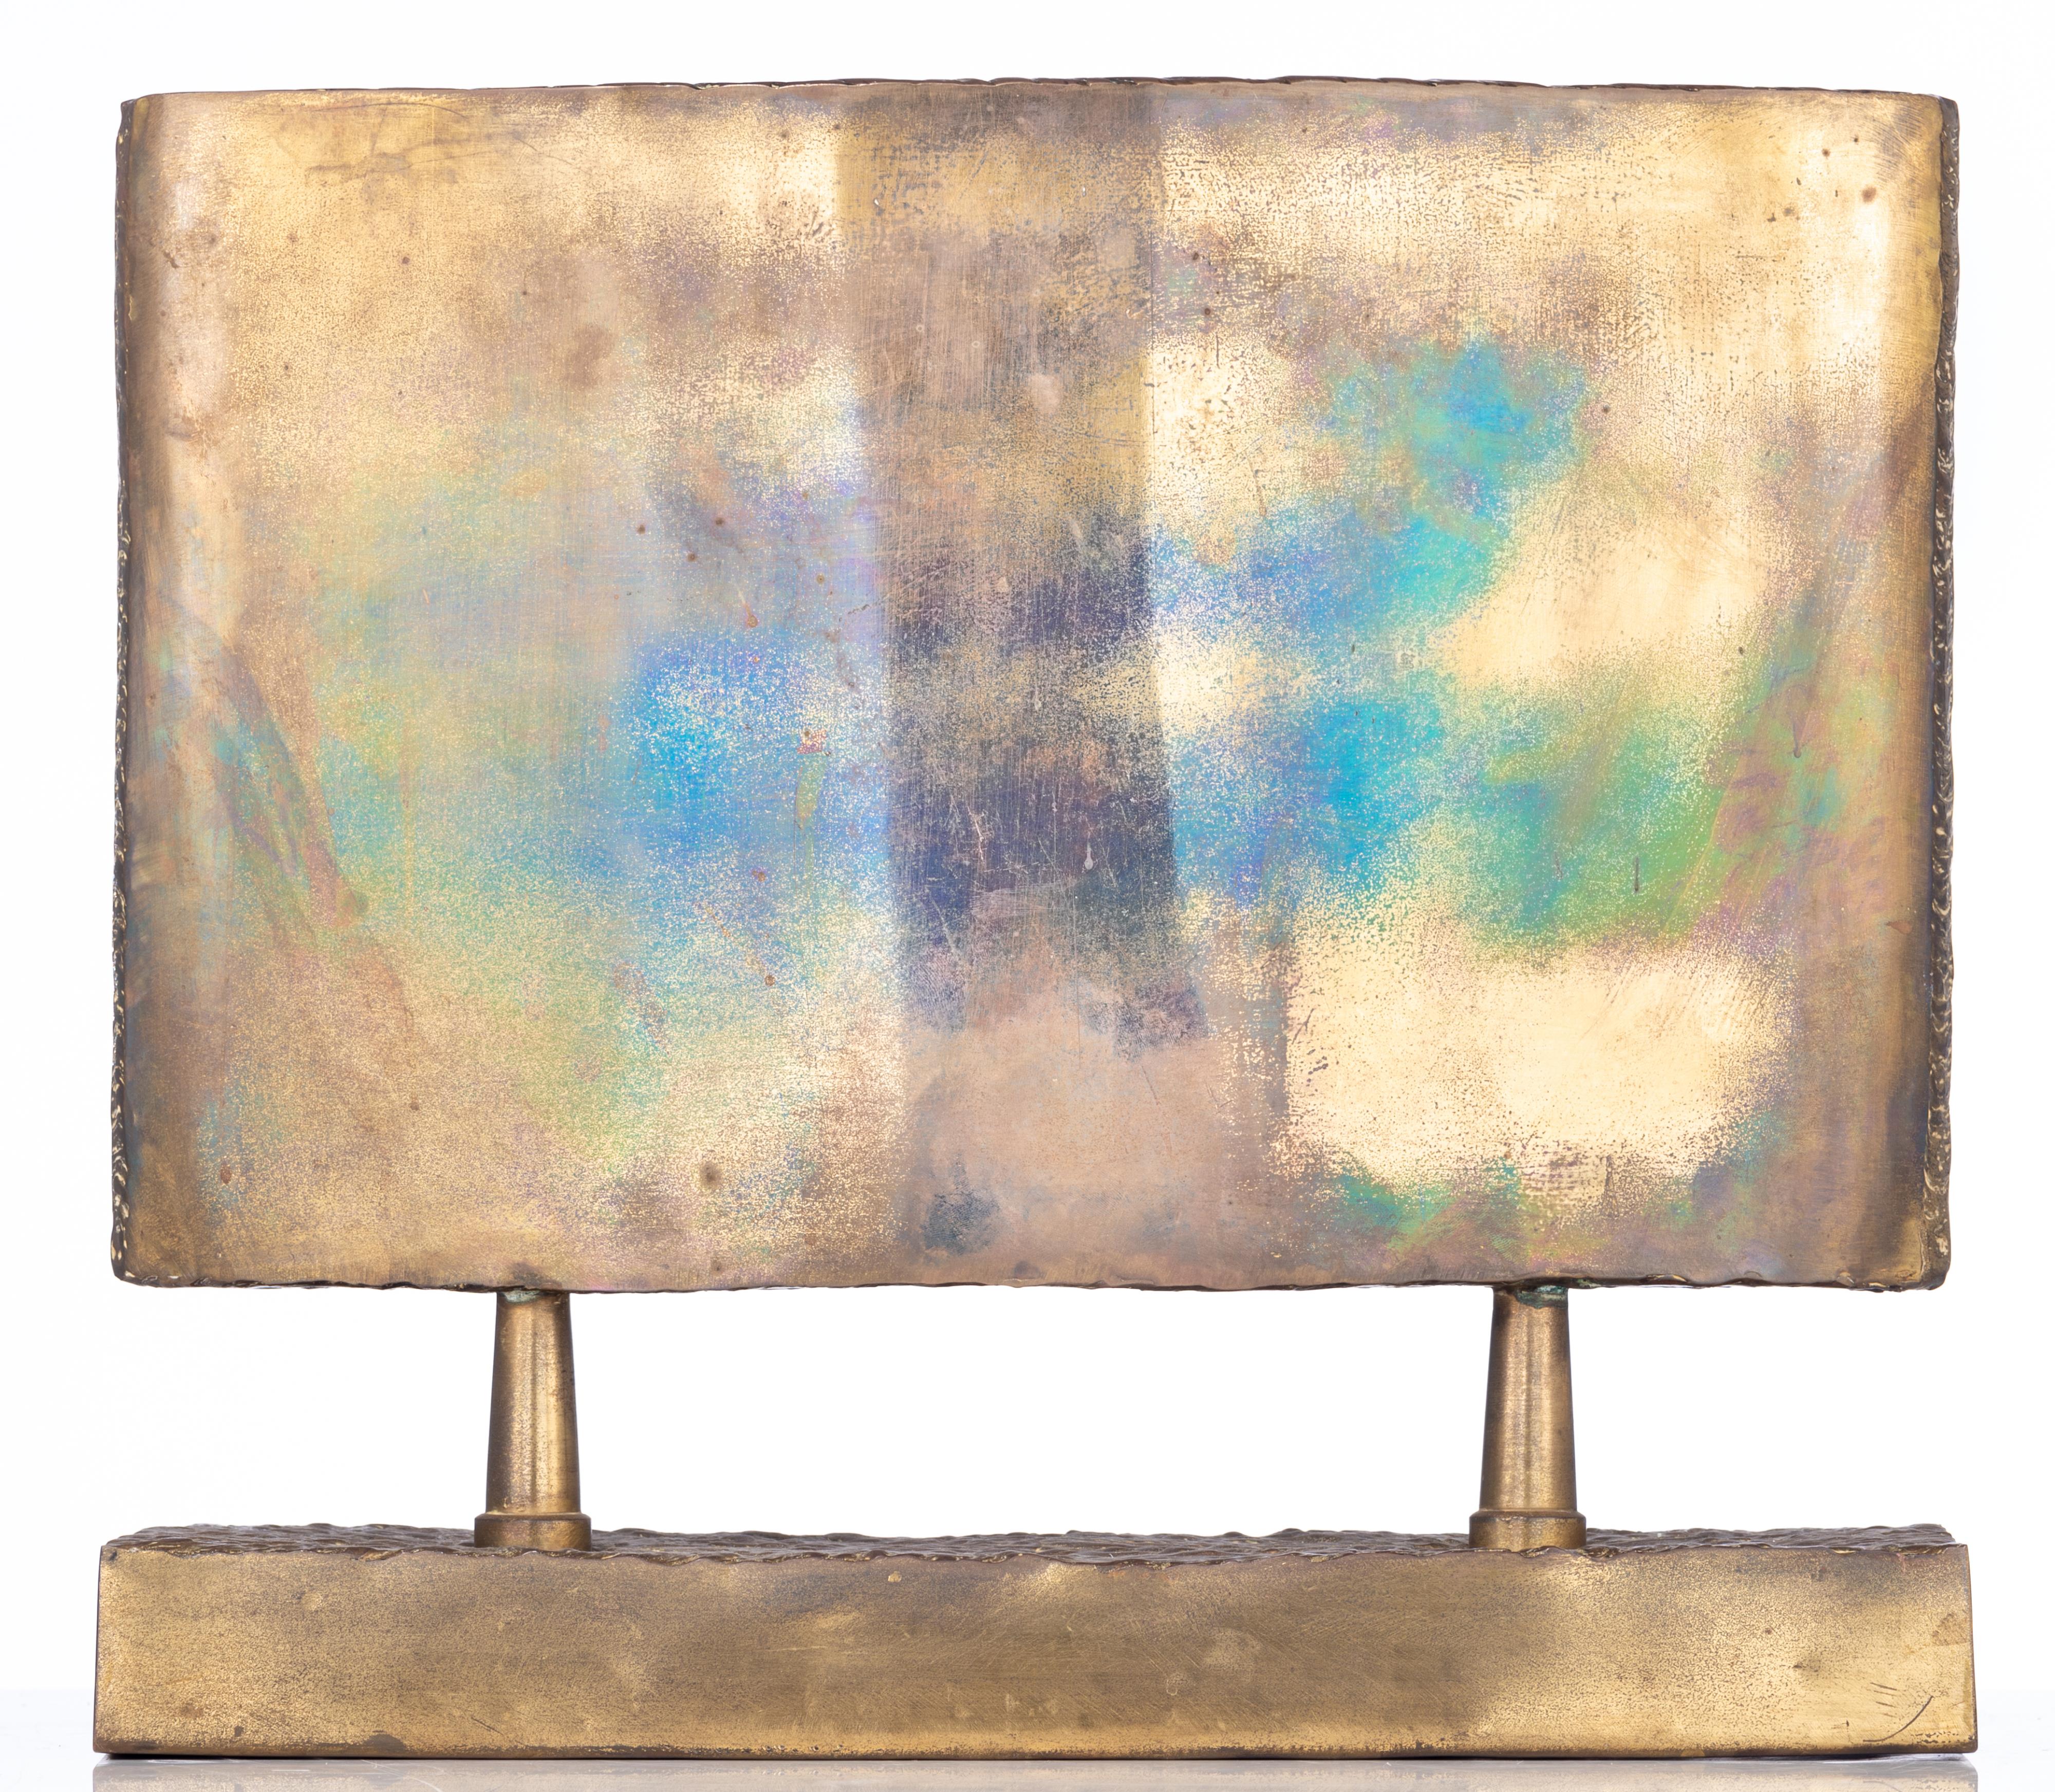 Claerhout J., untitled, patinated bronze, H 42 - W 46 cm. Added: Verjans R., untitled, dated 1975, N - Image 9 of 12